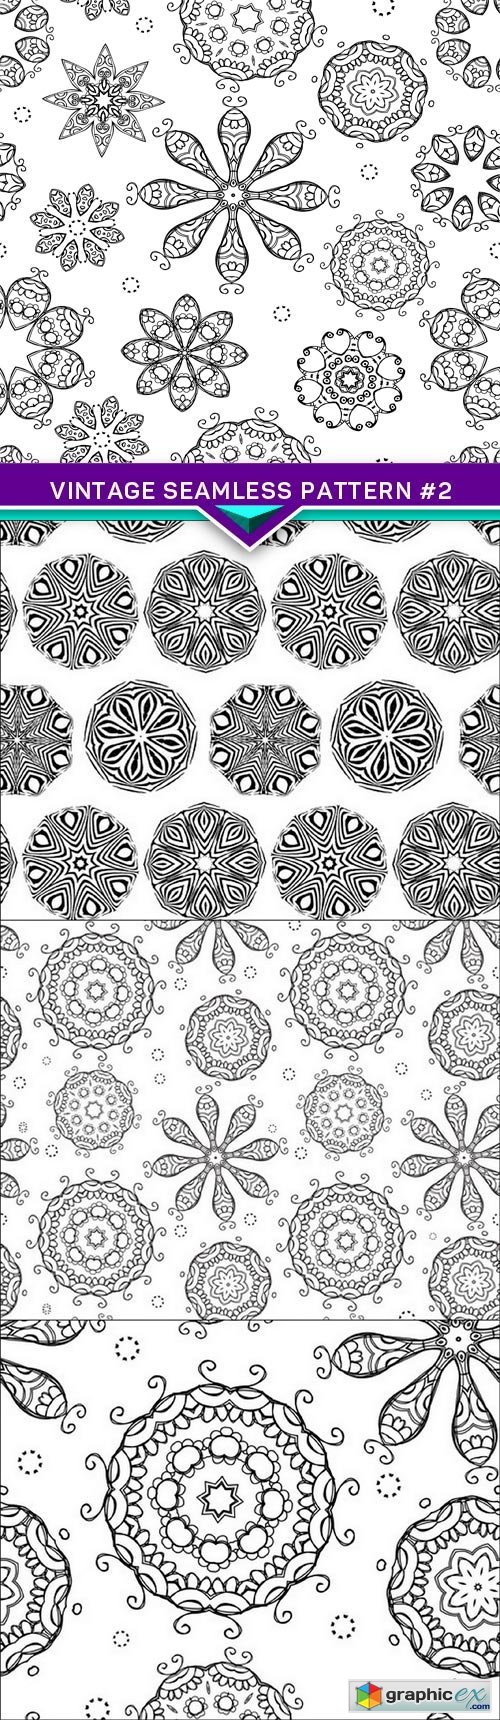 Vintage seamless pattern for your design #2 4X EPS